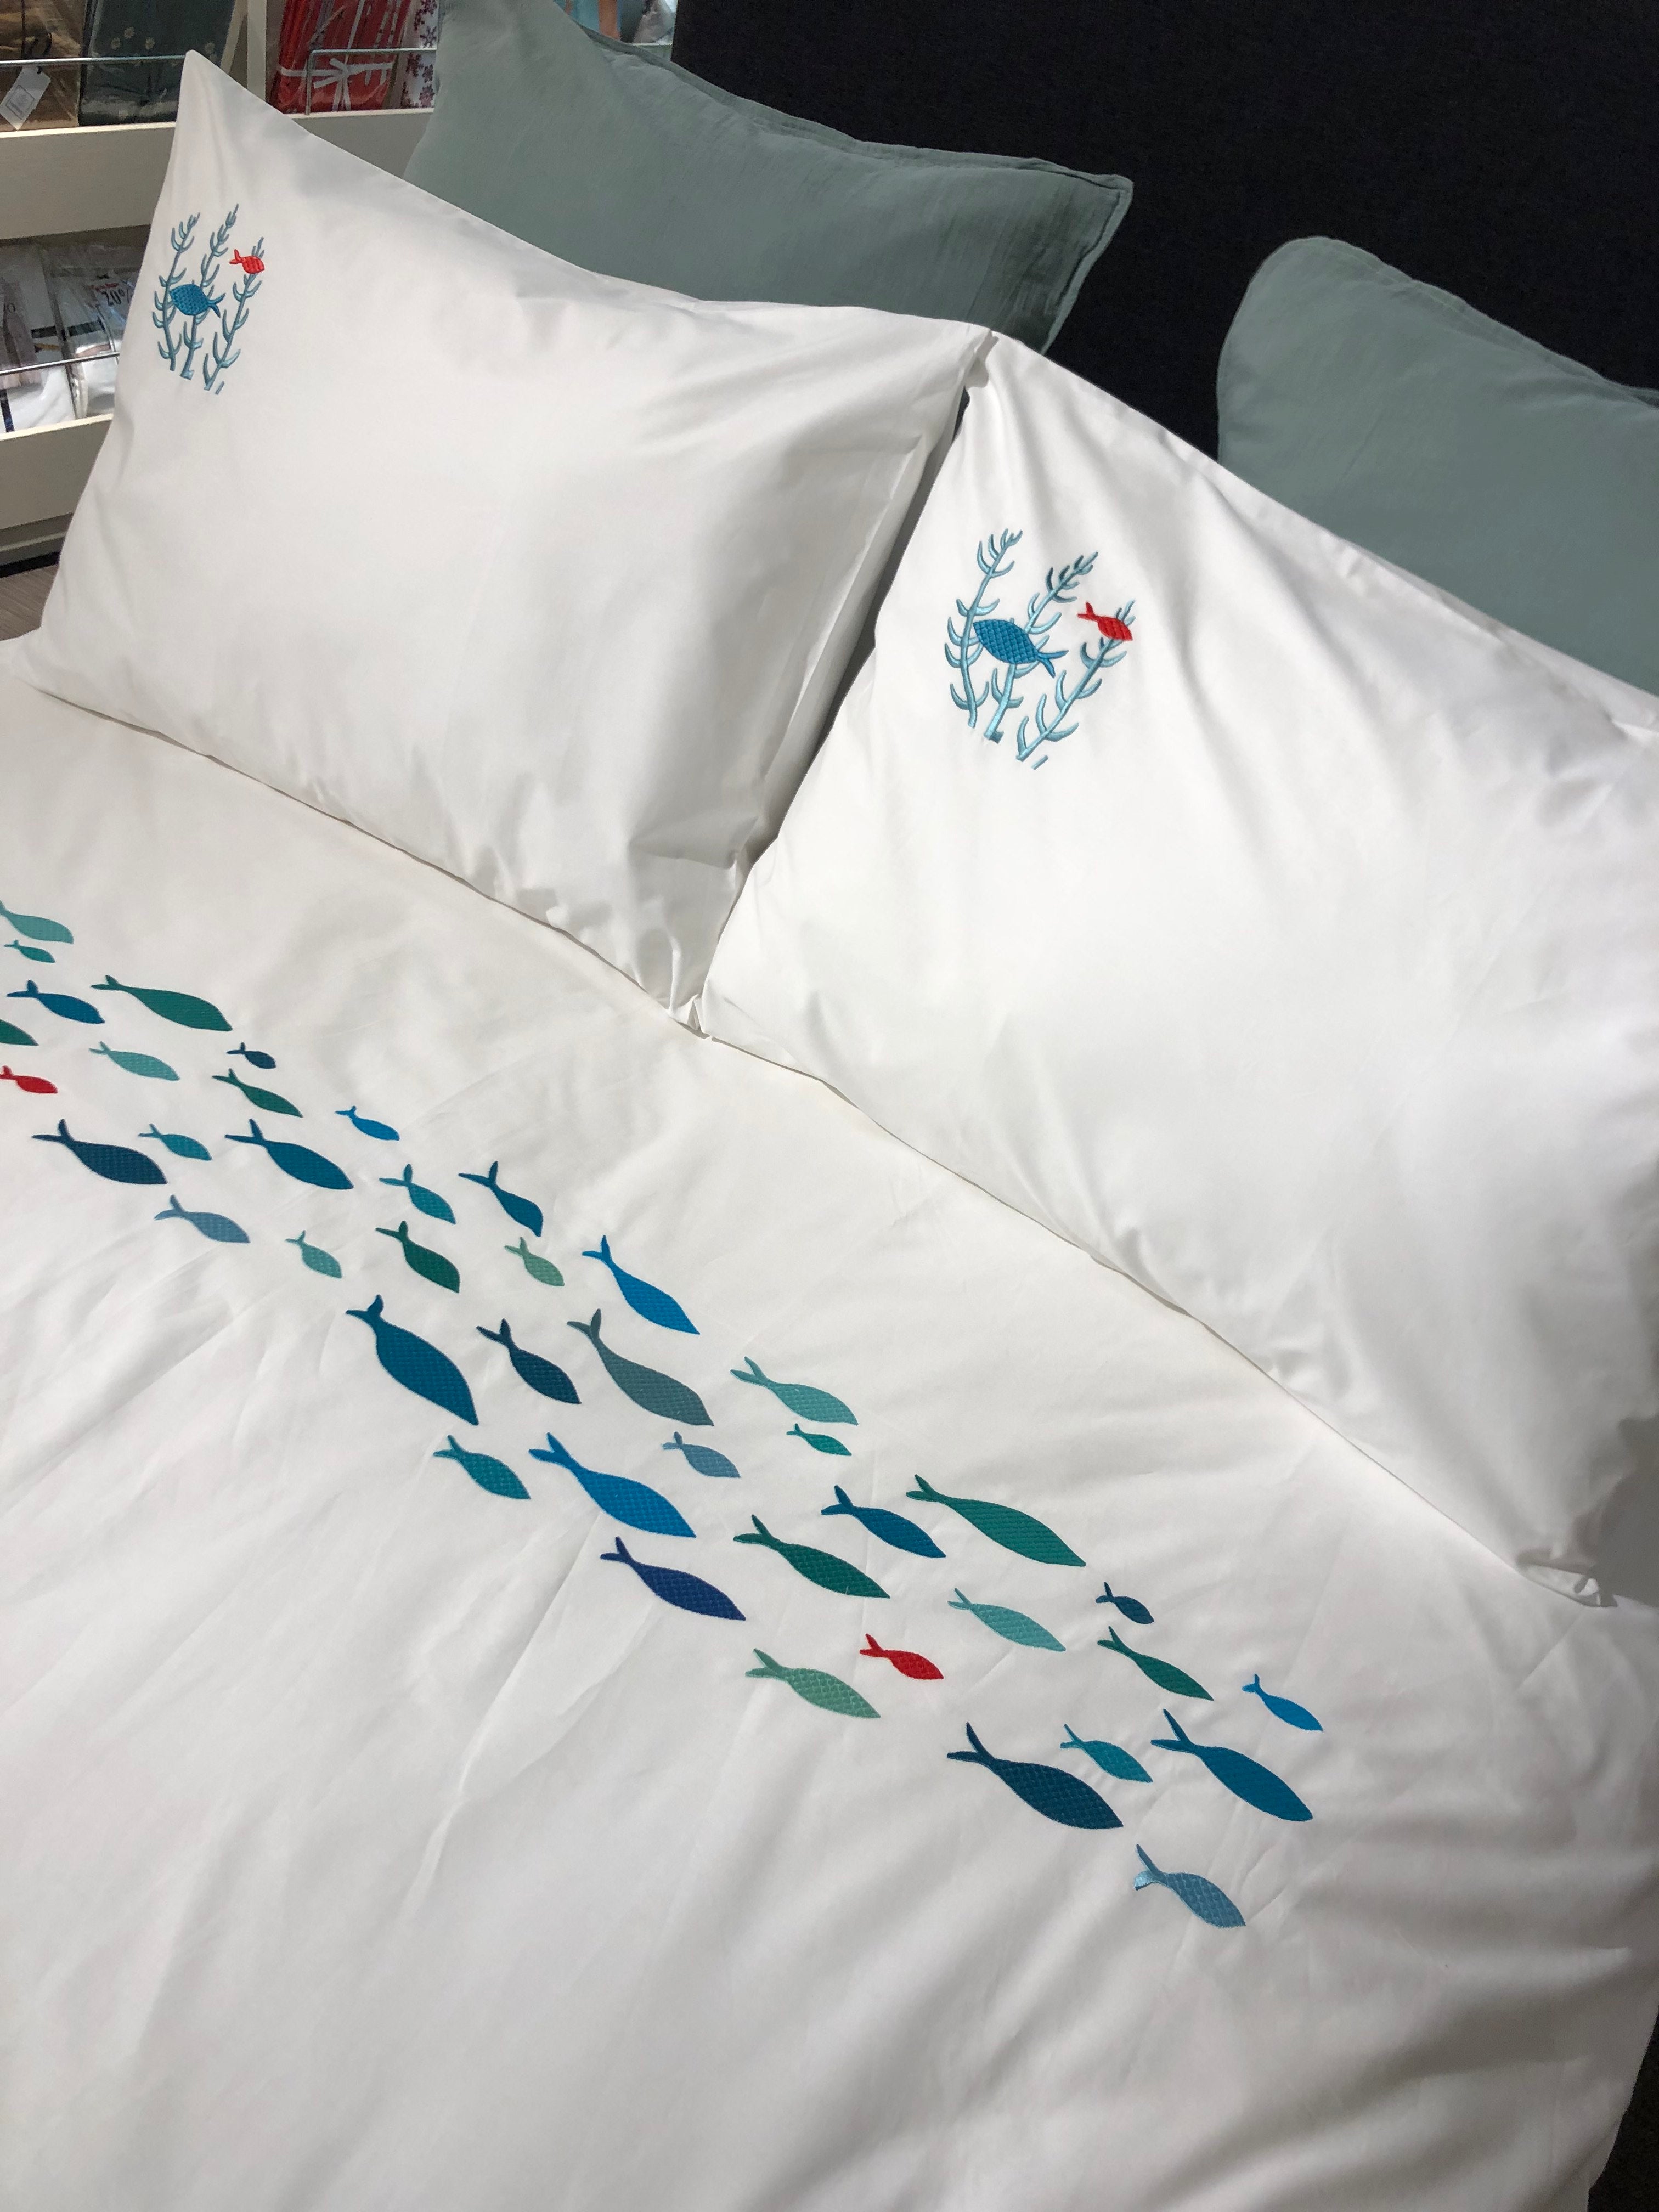 Printed cotton percale pillowcase with skiers